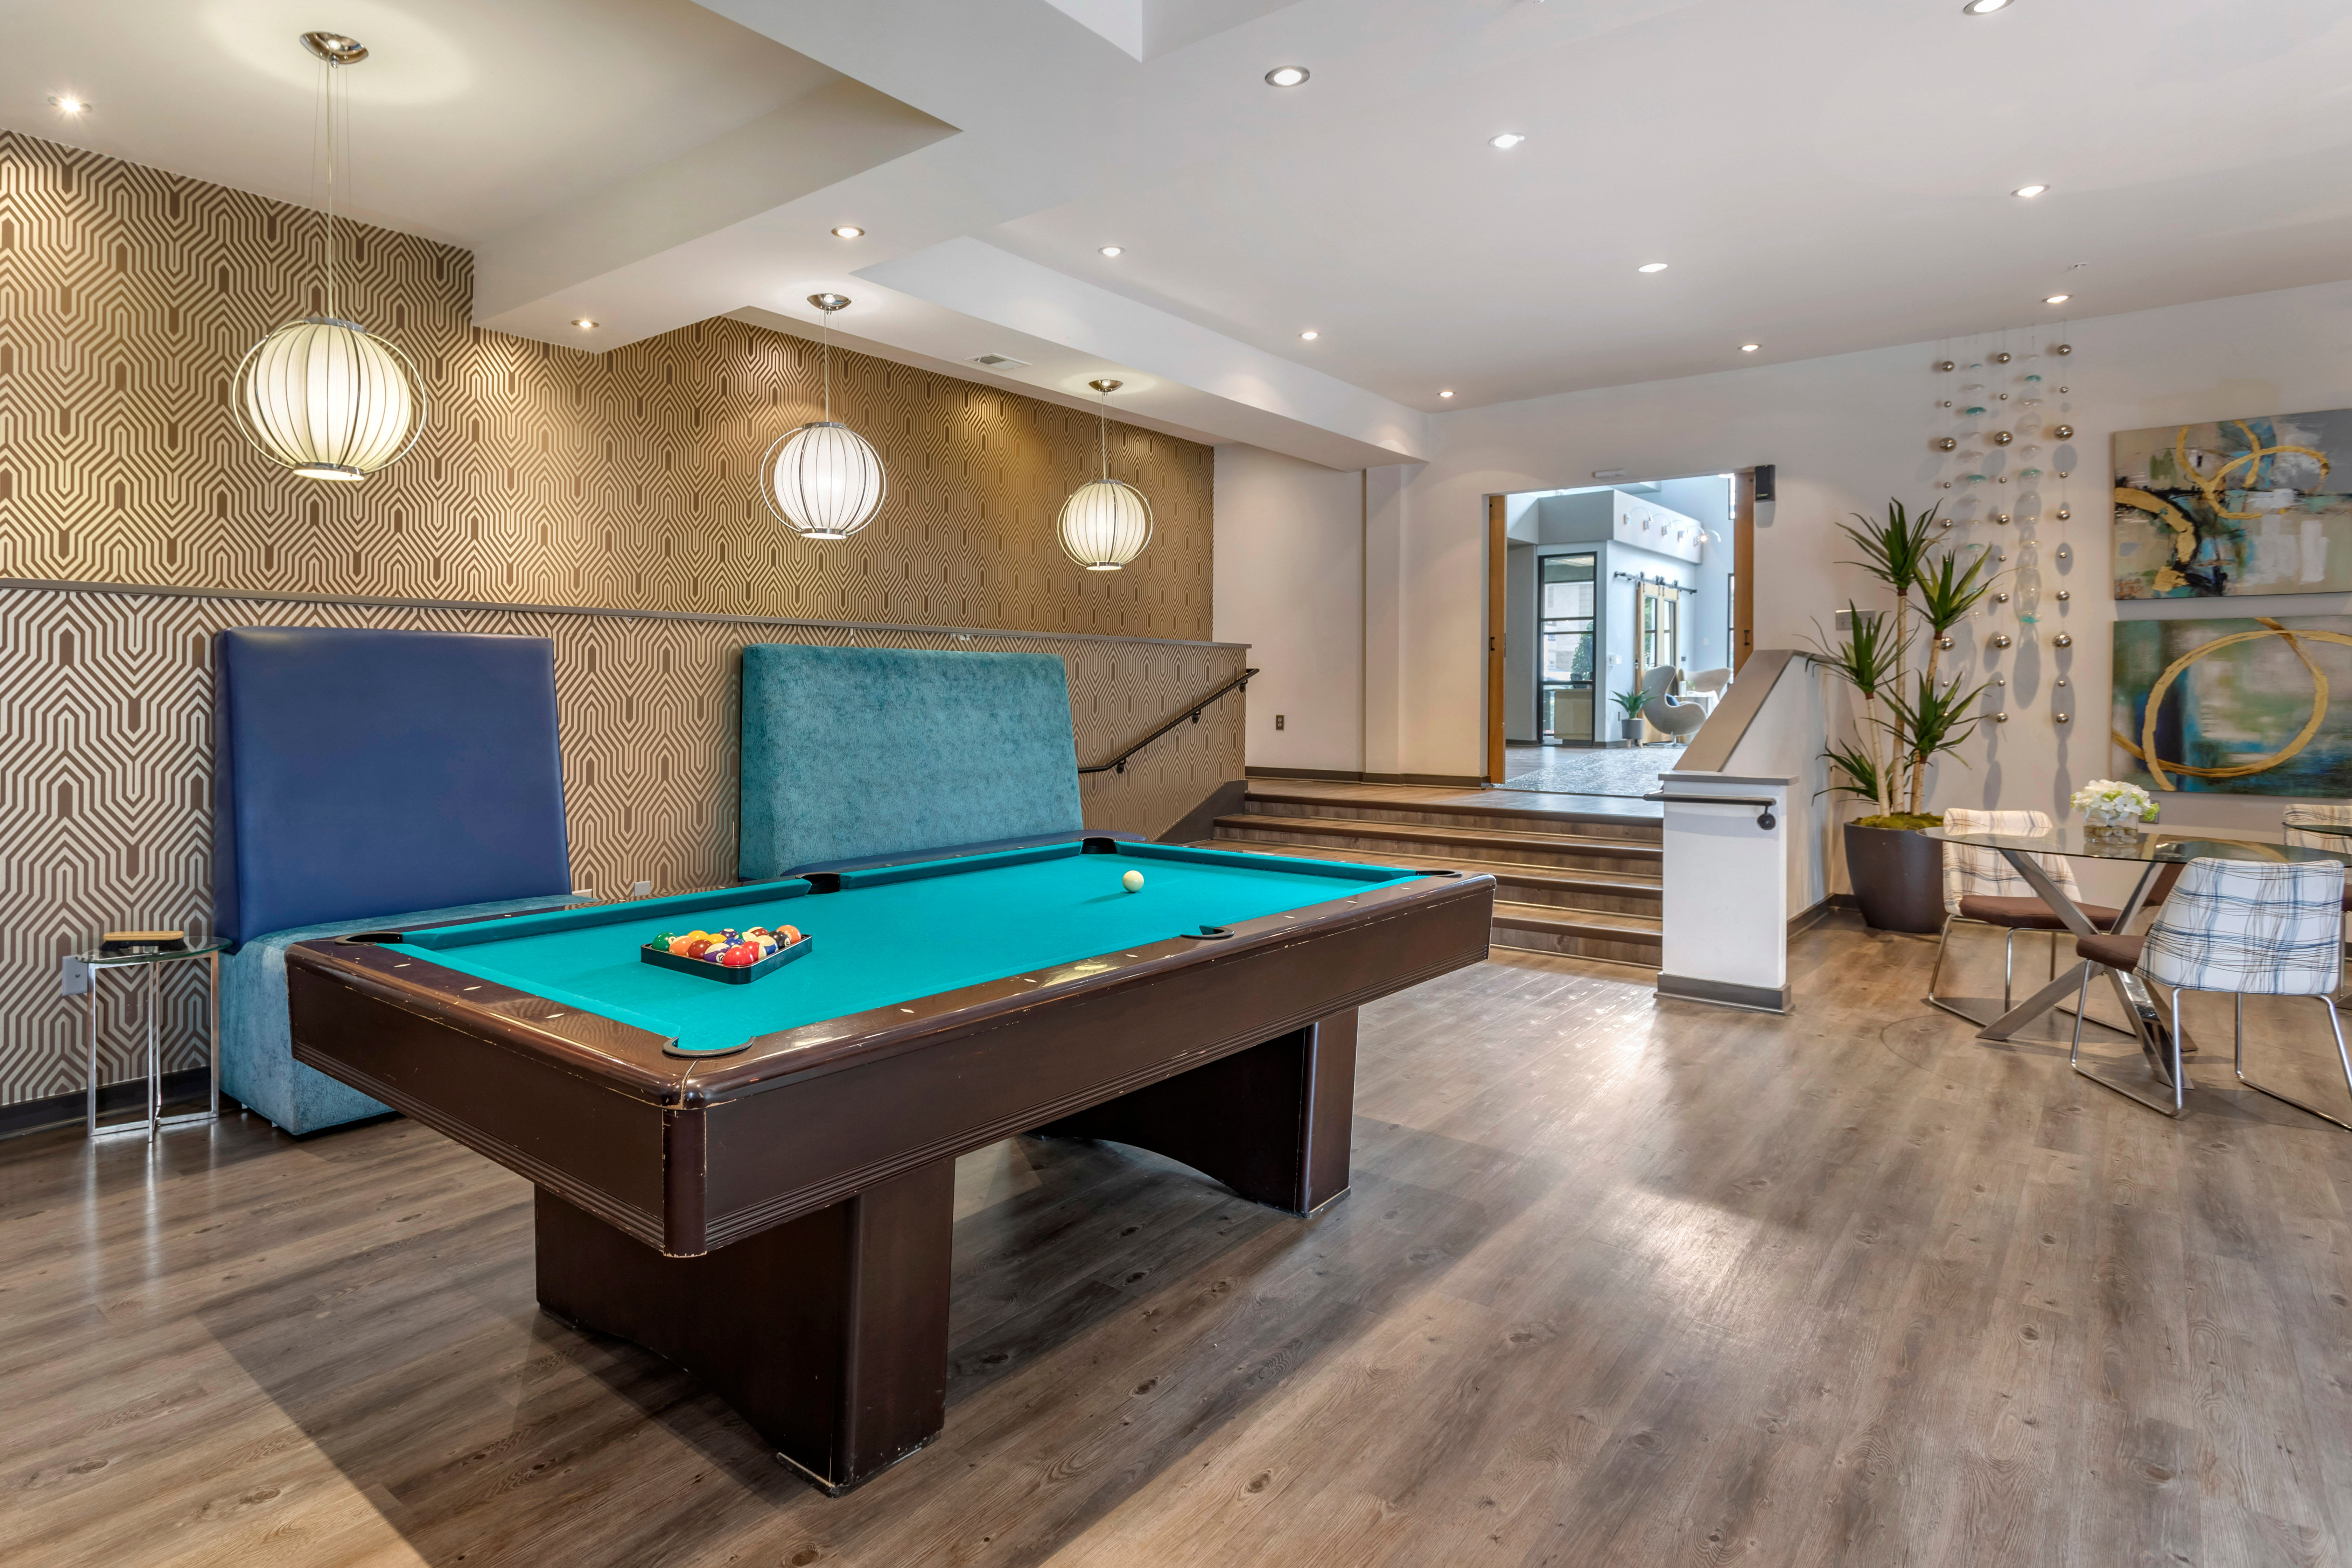 Billiards table and more in the resident clubhouse at Olympus Midtown in Nashville, Tennessee